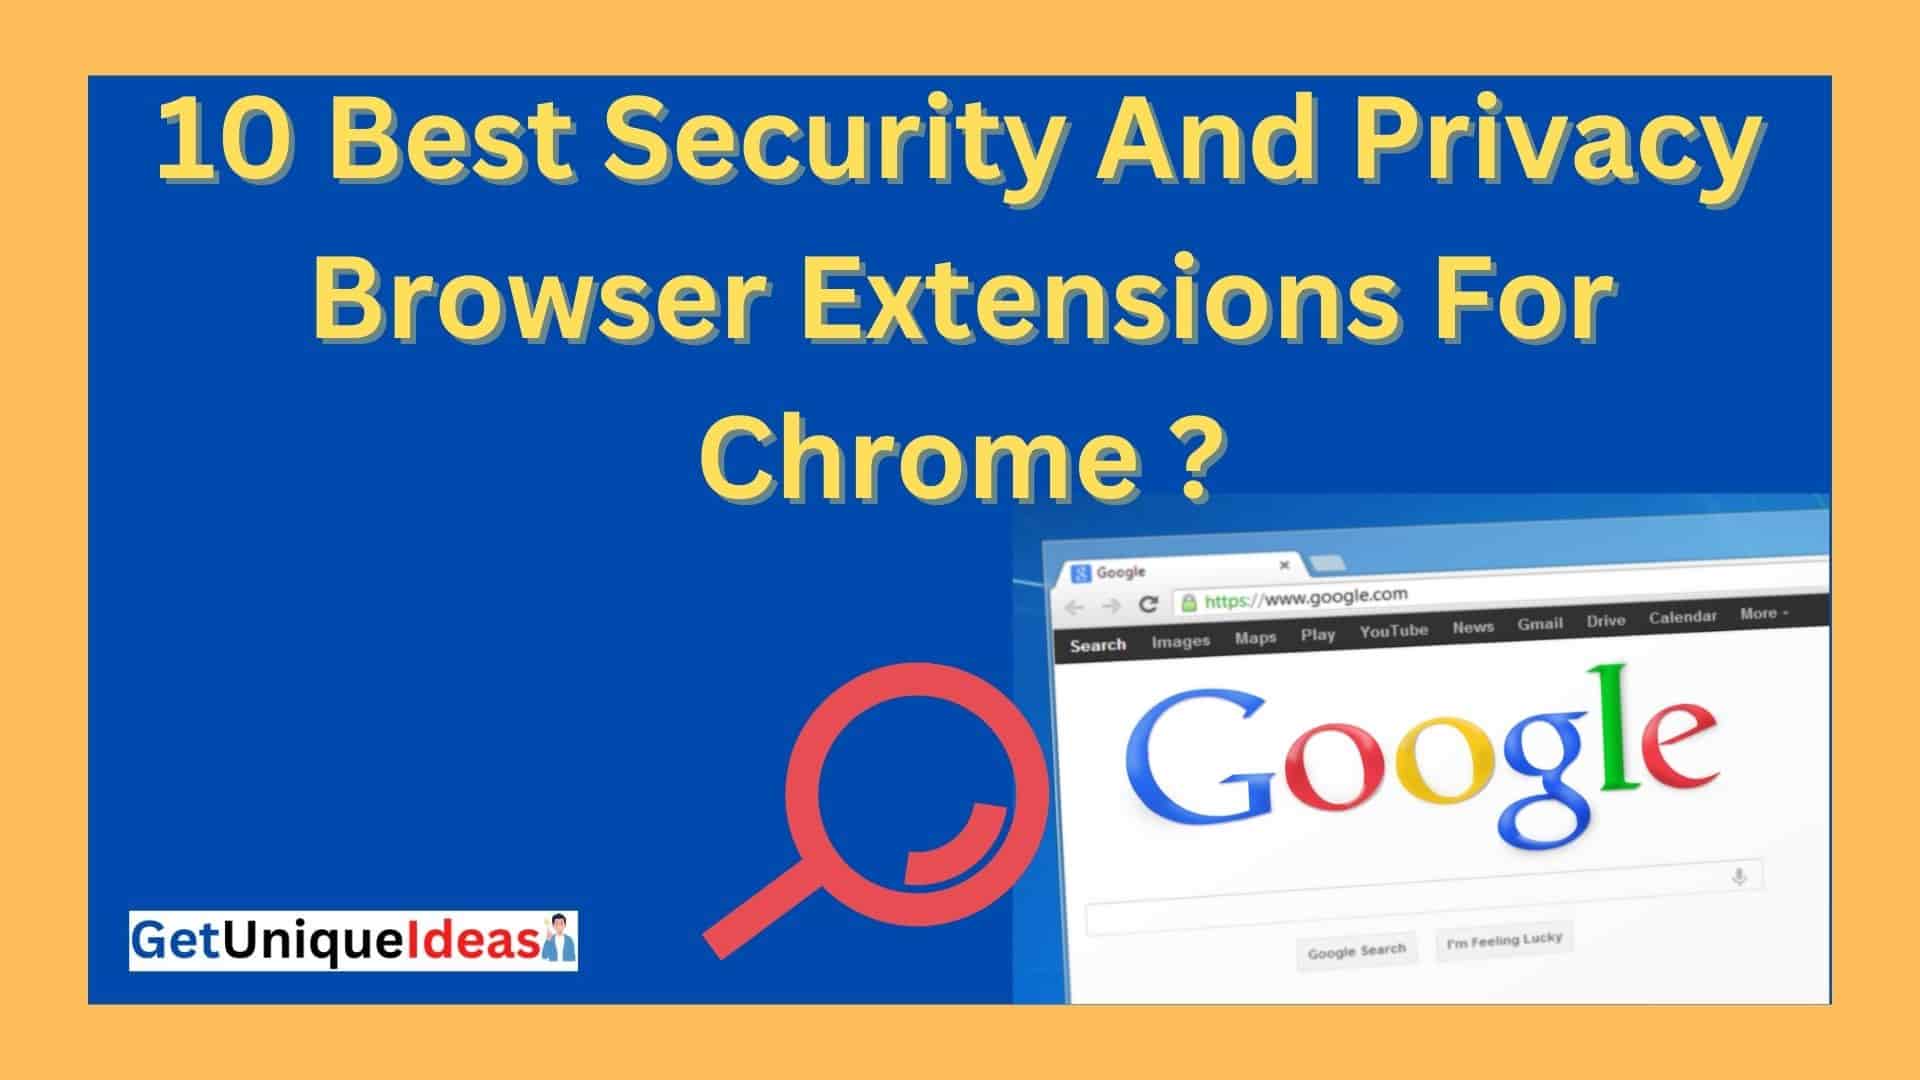 Best Security And Privacy Browser Extensions For Chrome